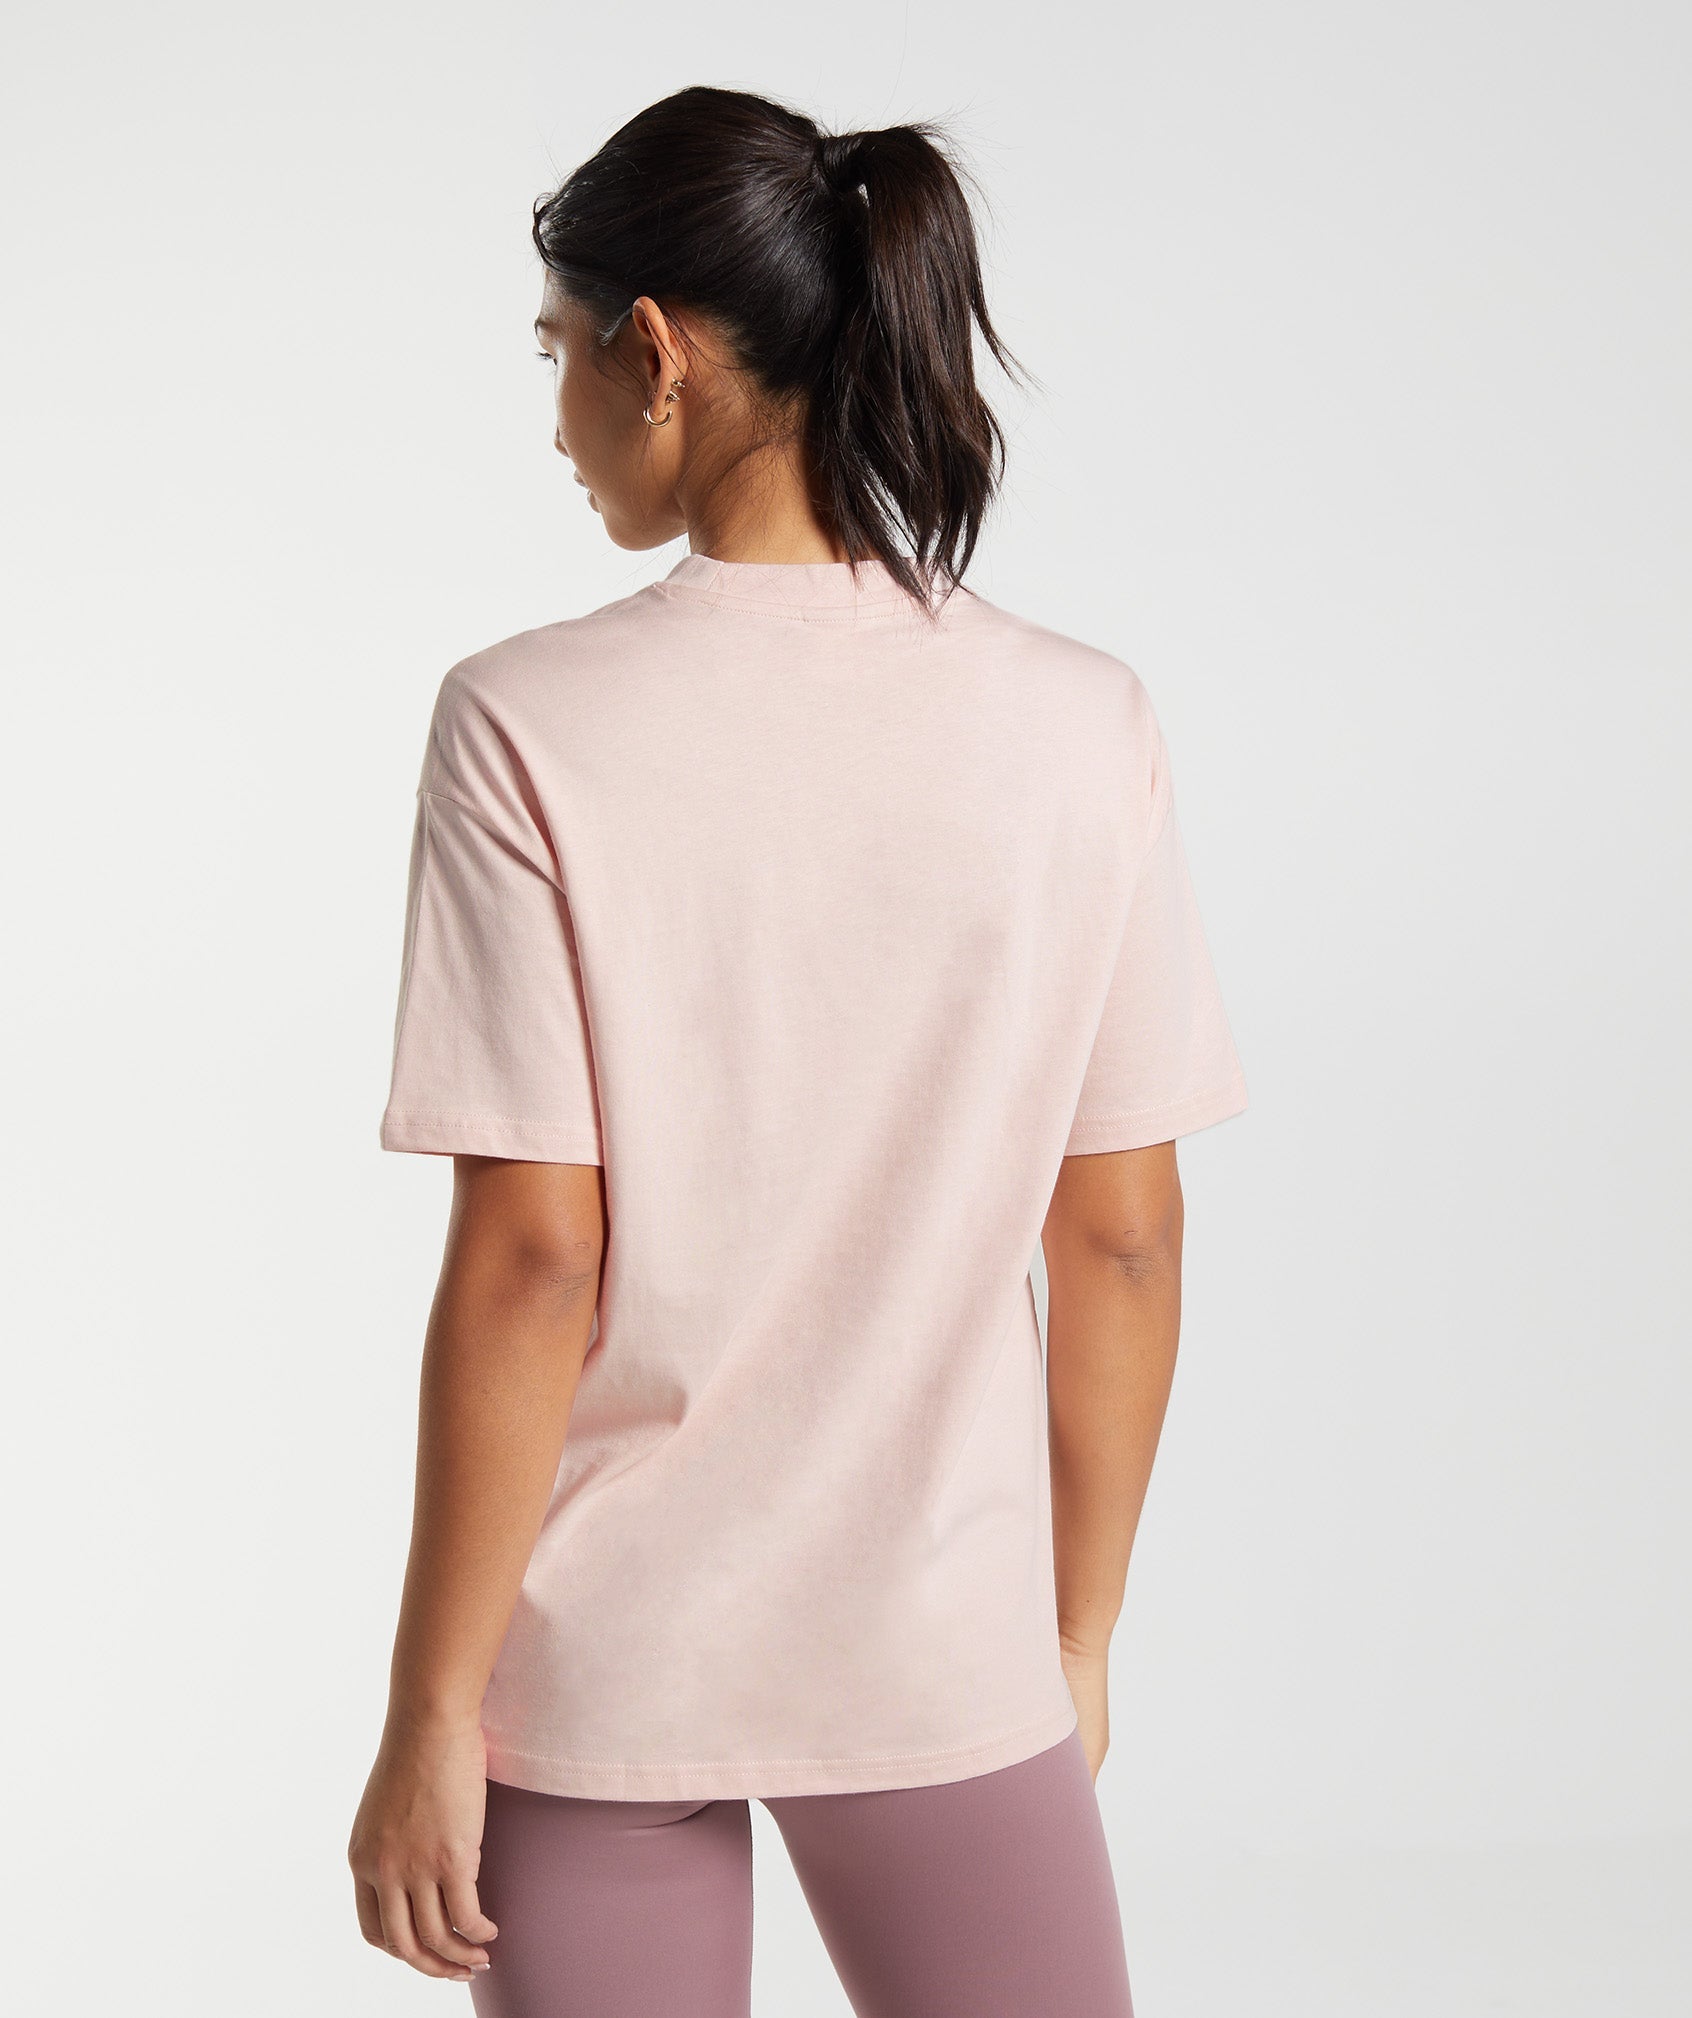 Training Oversized T-Shirt in Misty Pink